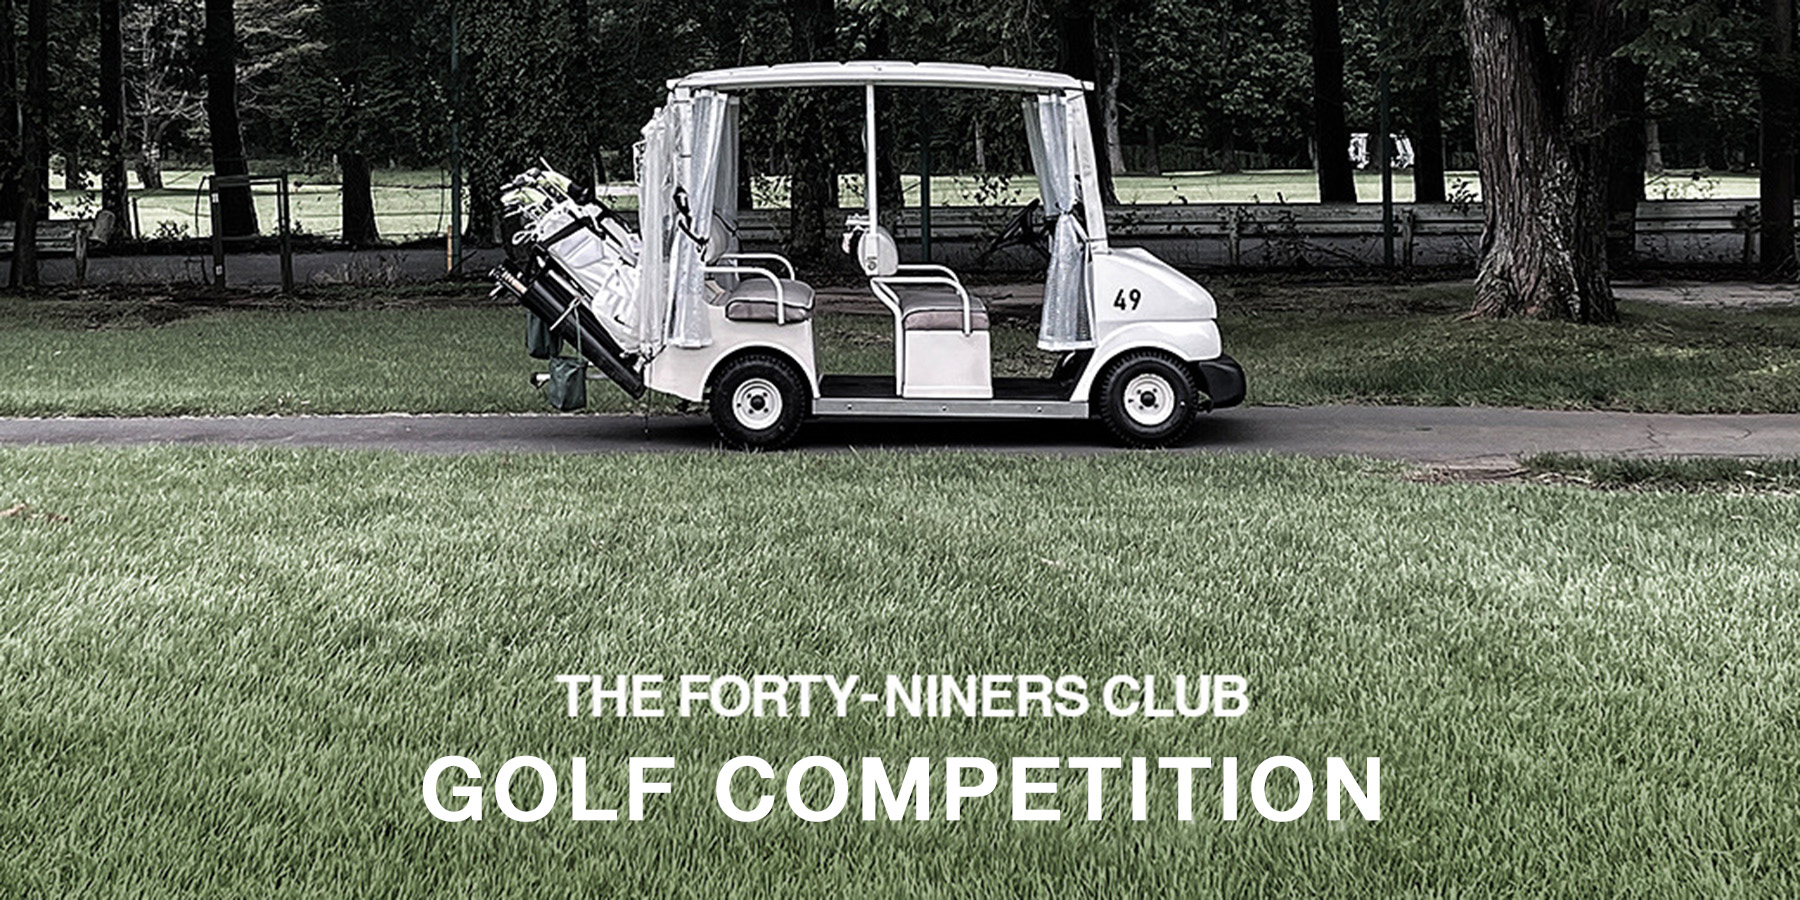 THE FORTY-NINERS CLUB GOLF COMPETITION 12.15THU